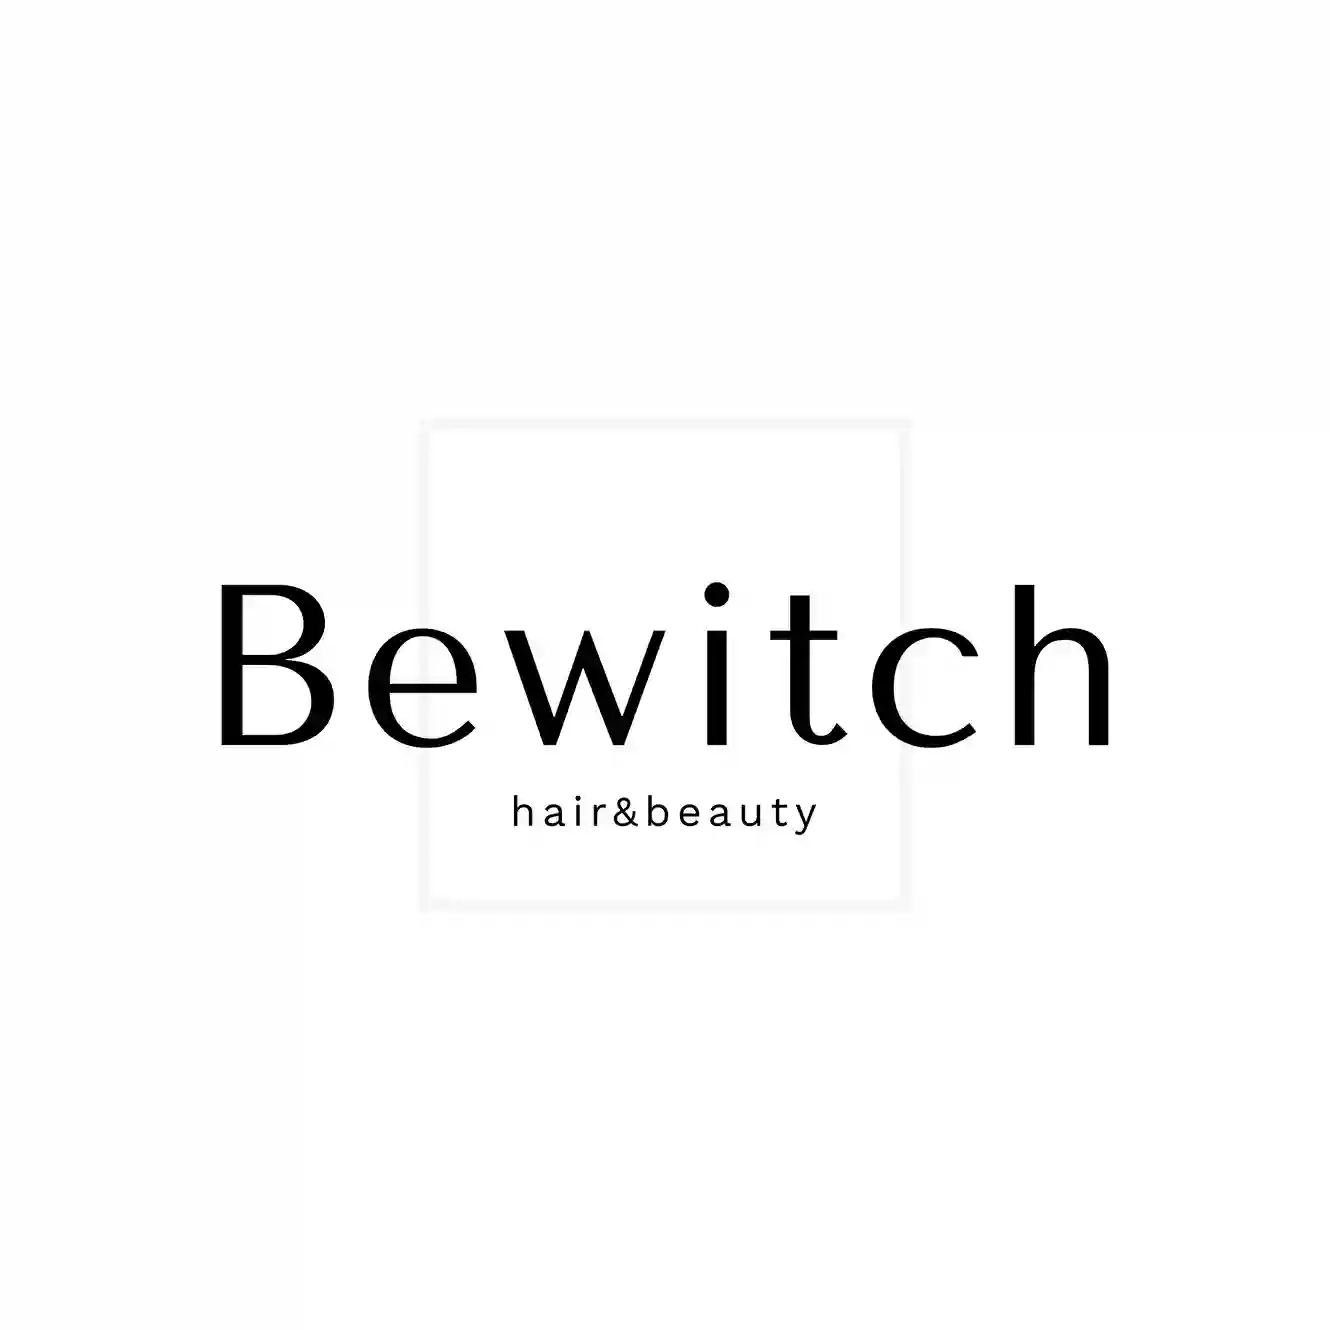 "Bewitch" hair & beauty